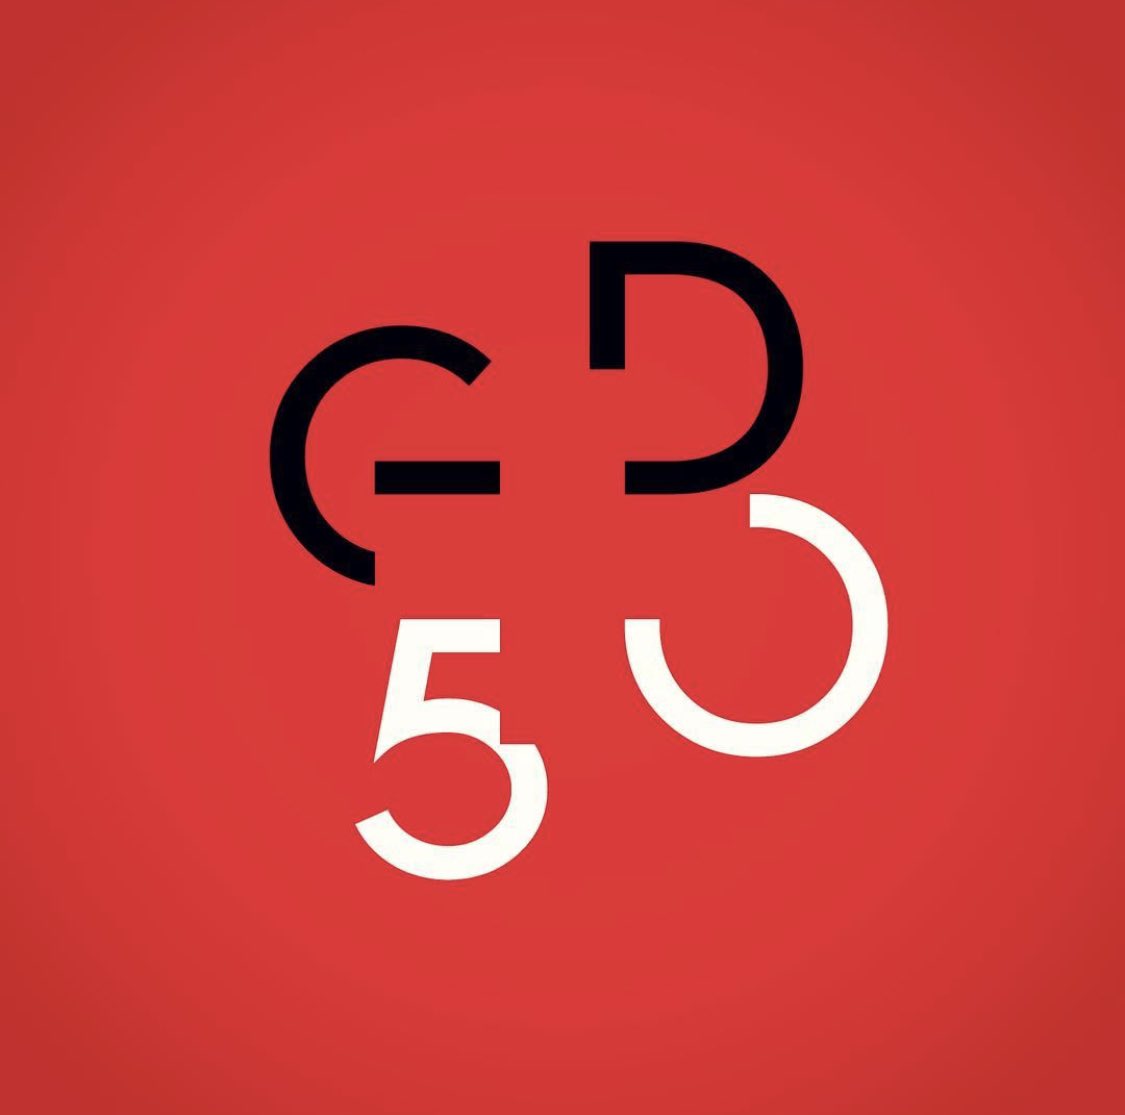 @HelloBravemark One of my favorite negative space logos to come out of our studio @SEDSODESIGN was this GD50 logo we did with the Swiss cross knockout for the 50th Anniversary celebration of the graphic design program @UArts